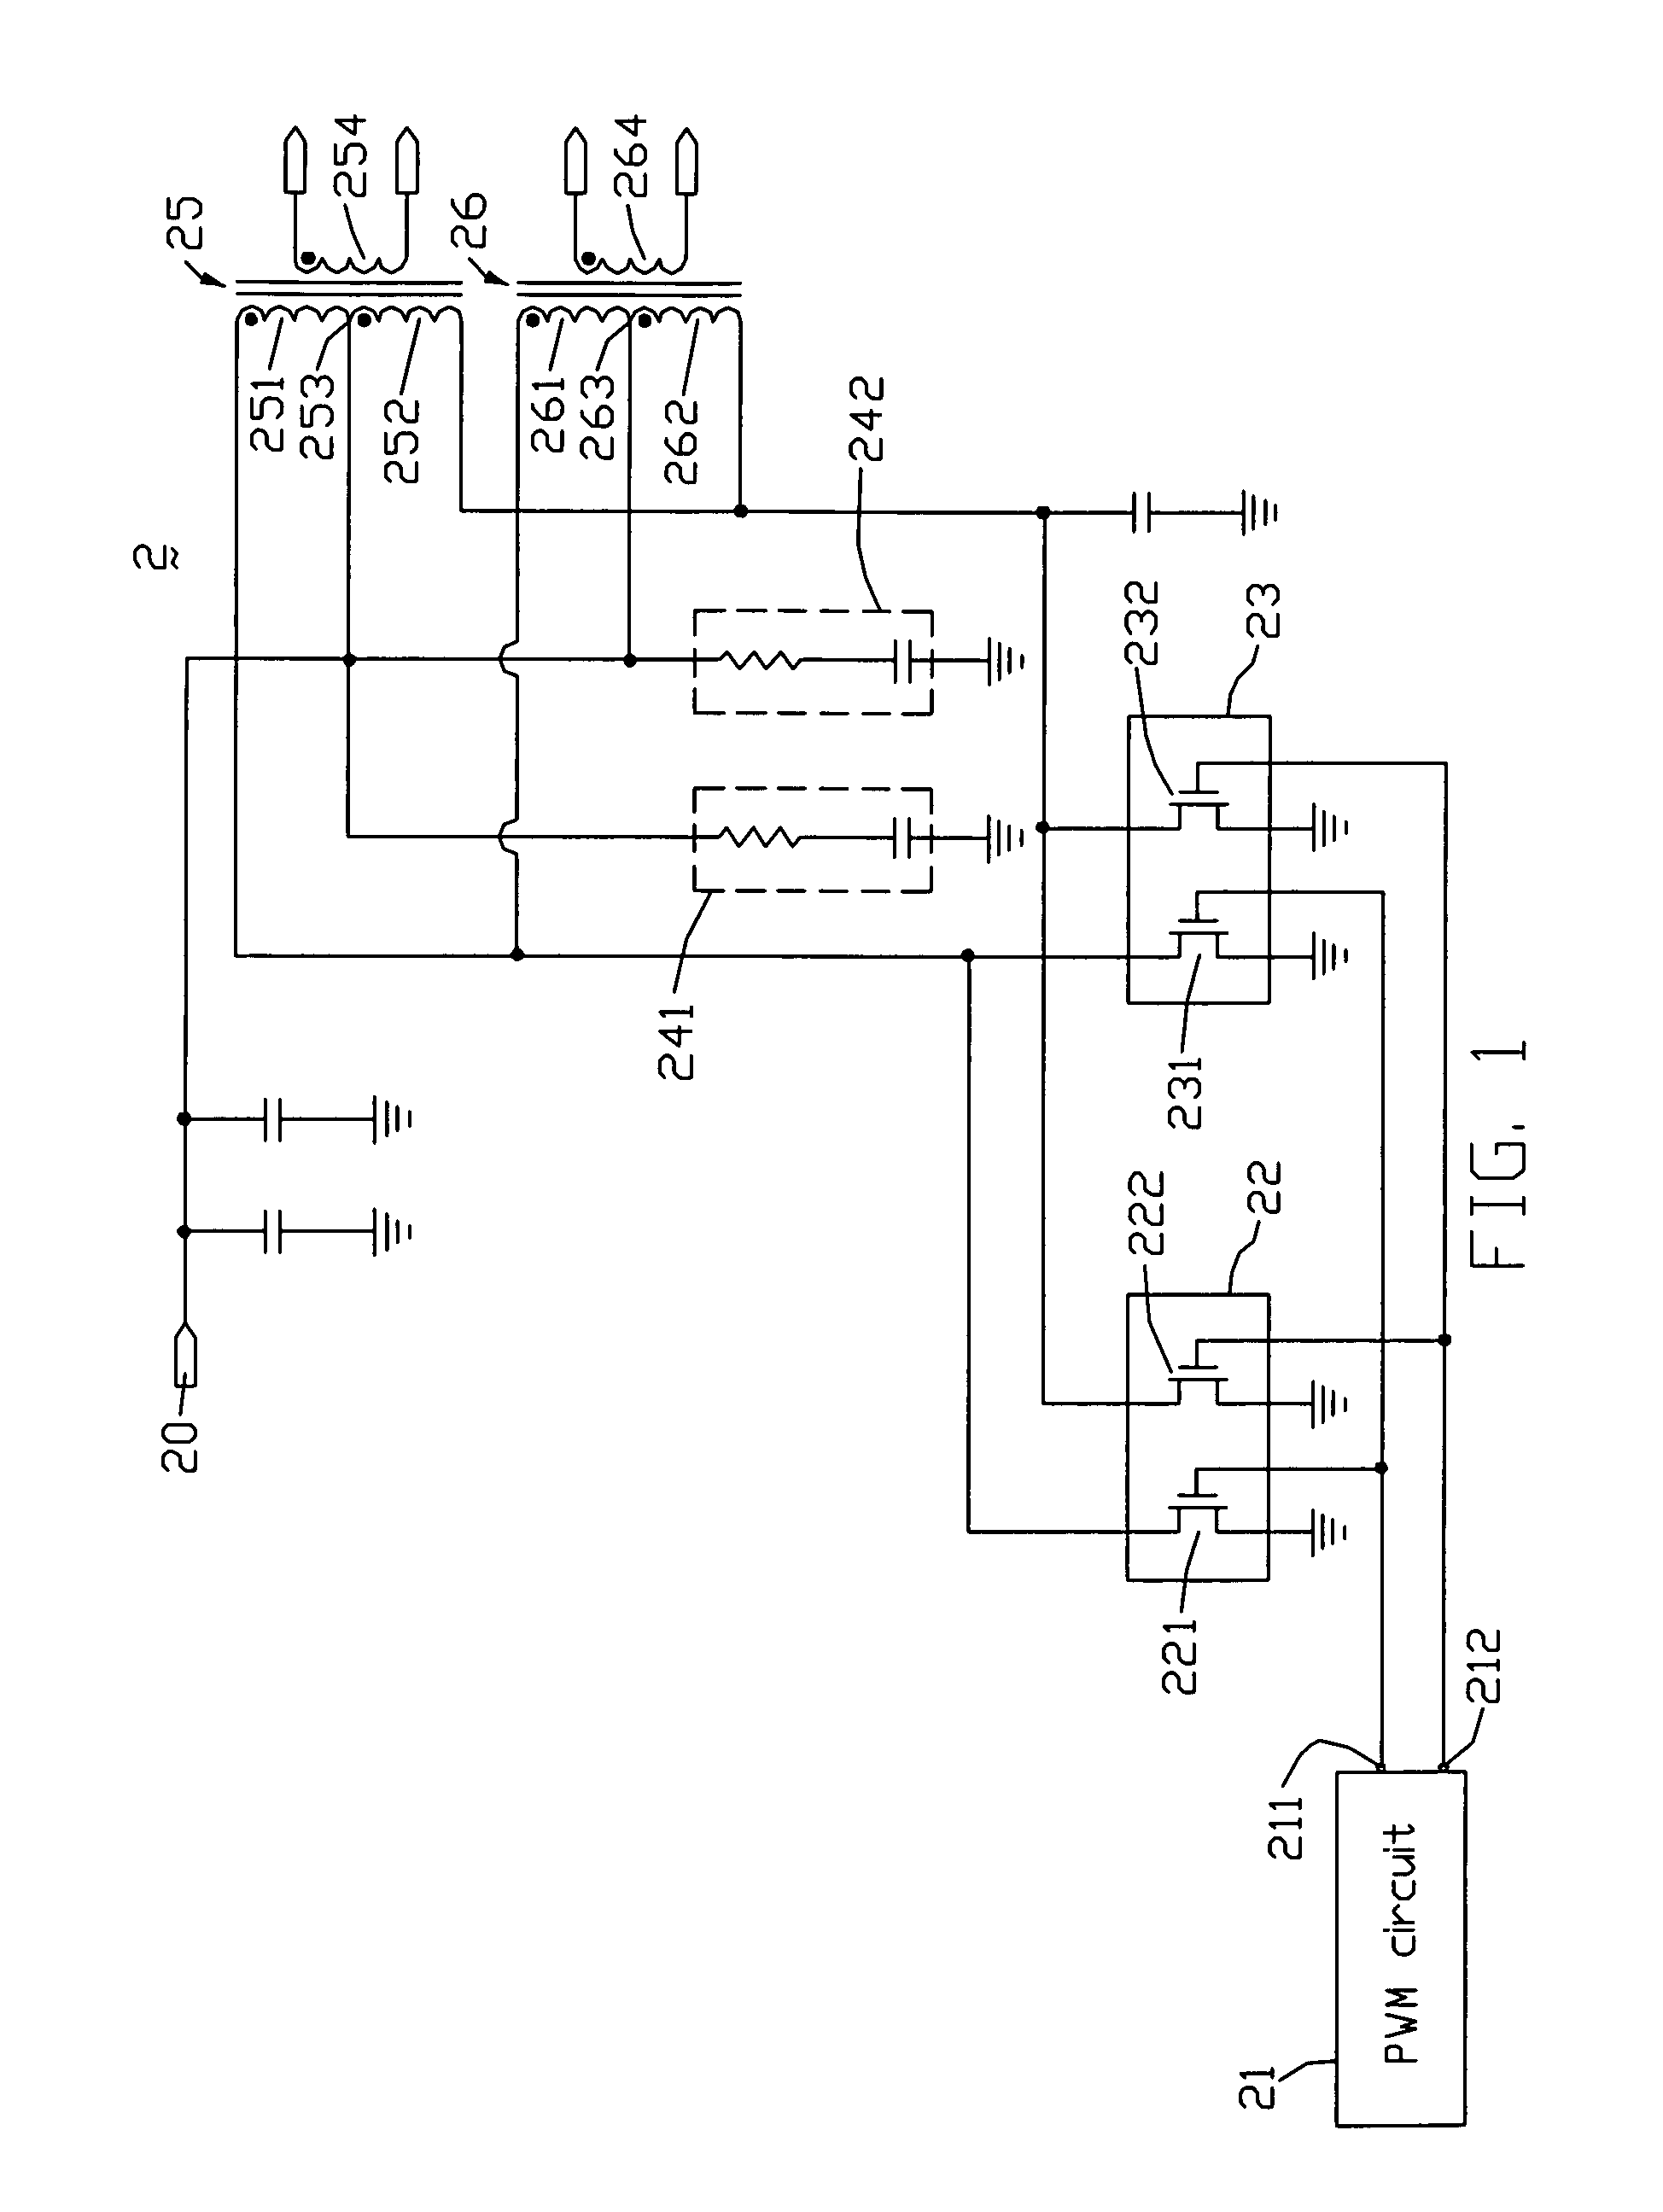 Inverter circuit with switch circuit having two transistors operating alternatively